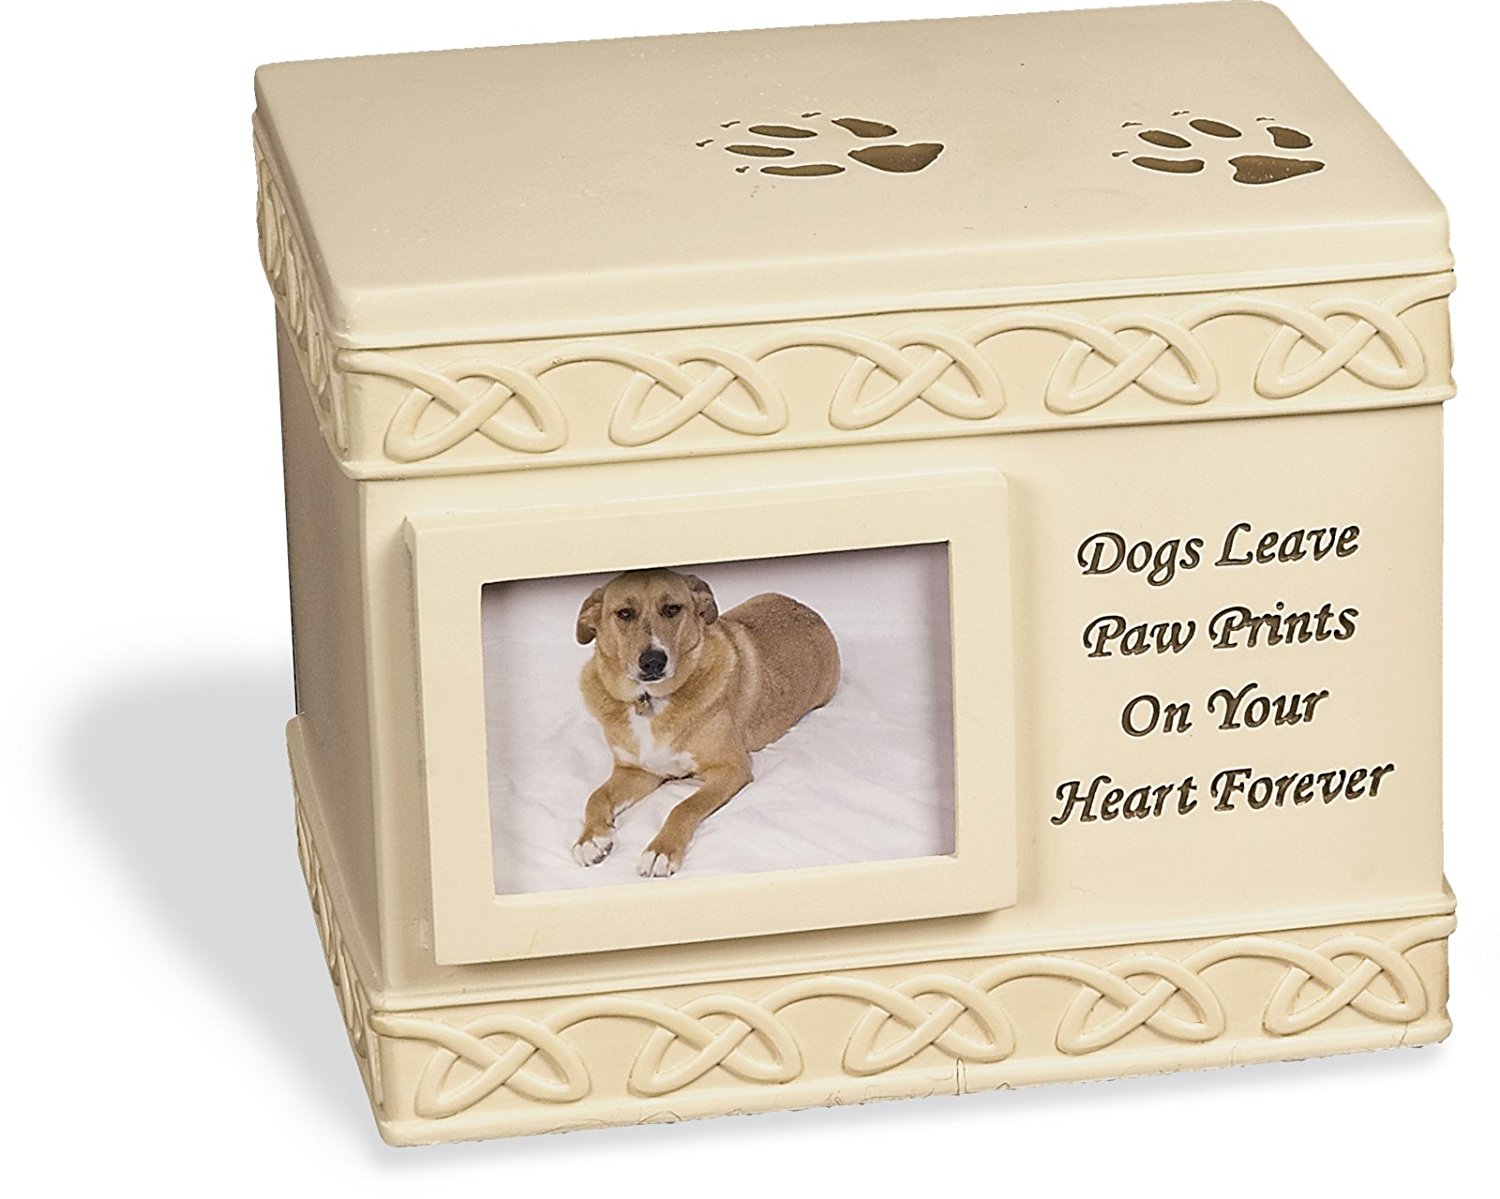 Pet Cremation Urn with quote - Dogs Leave Pawprints on your heart forever